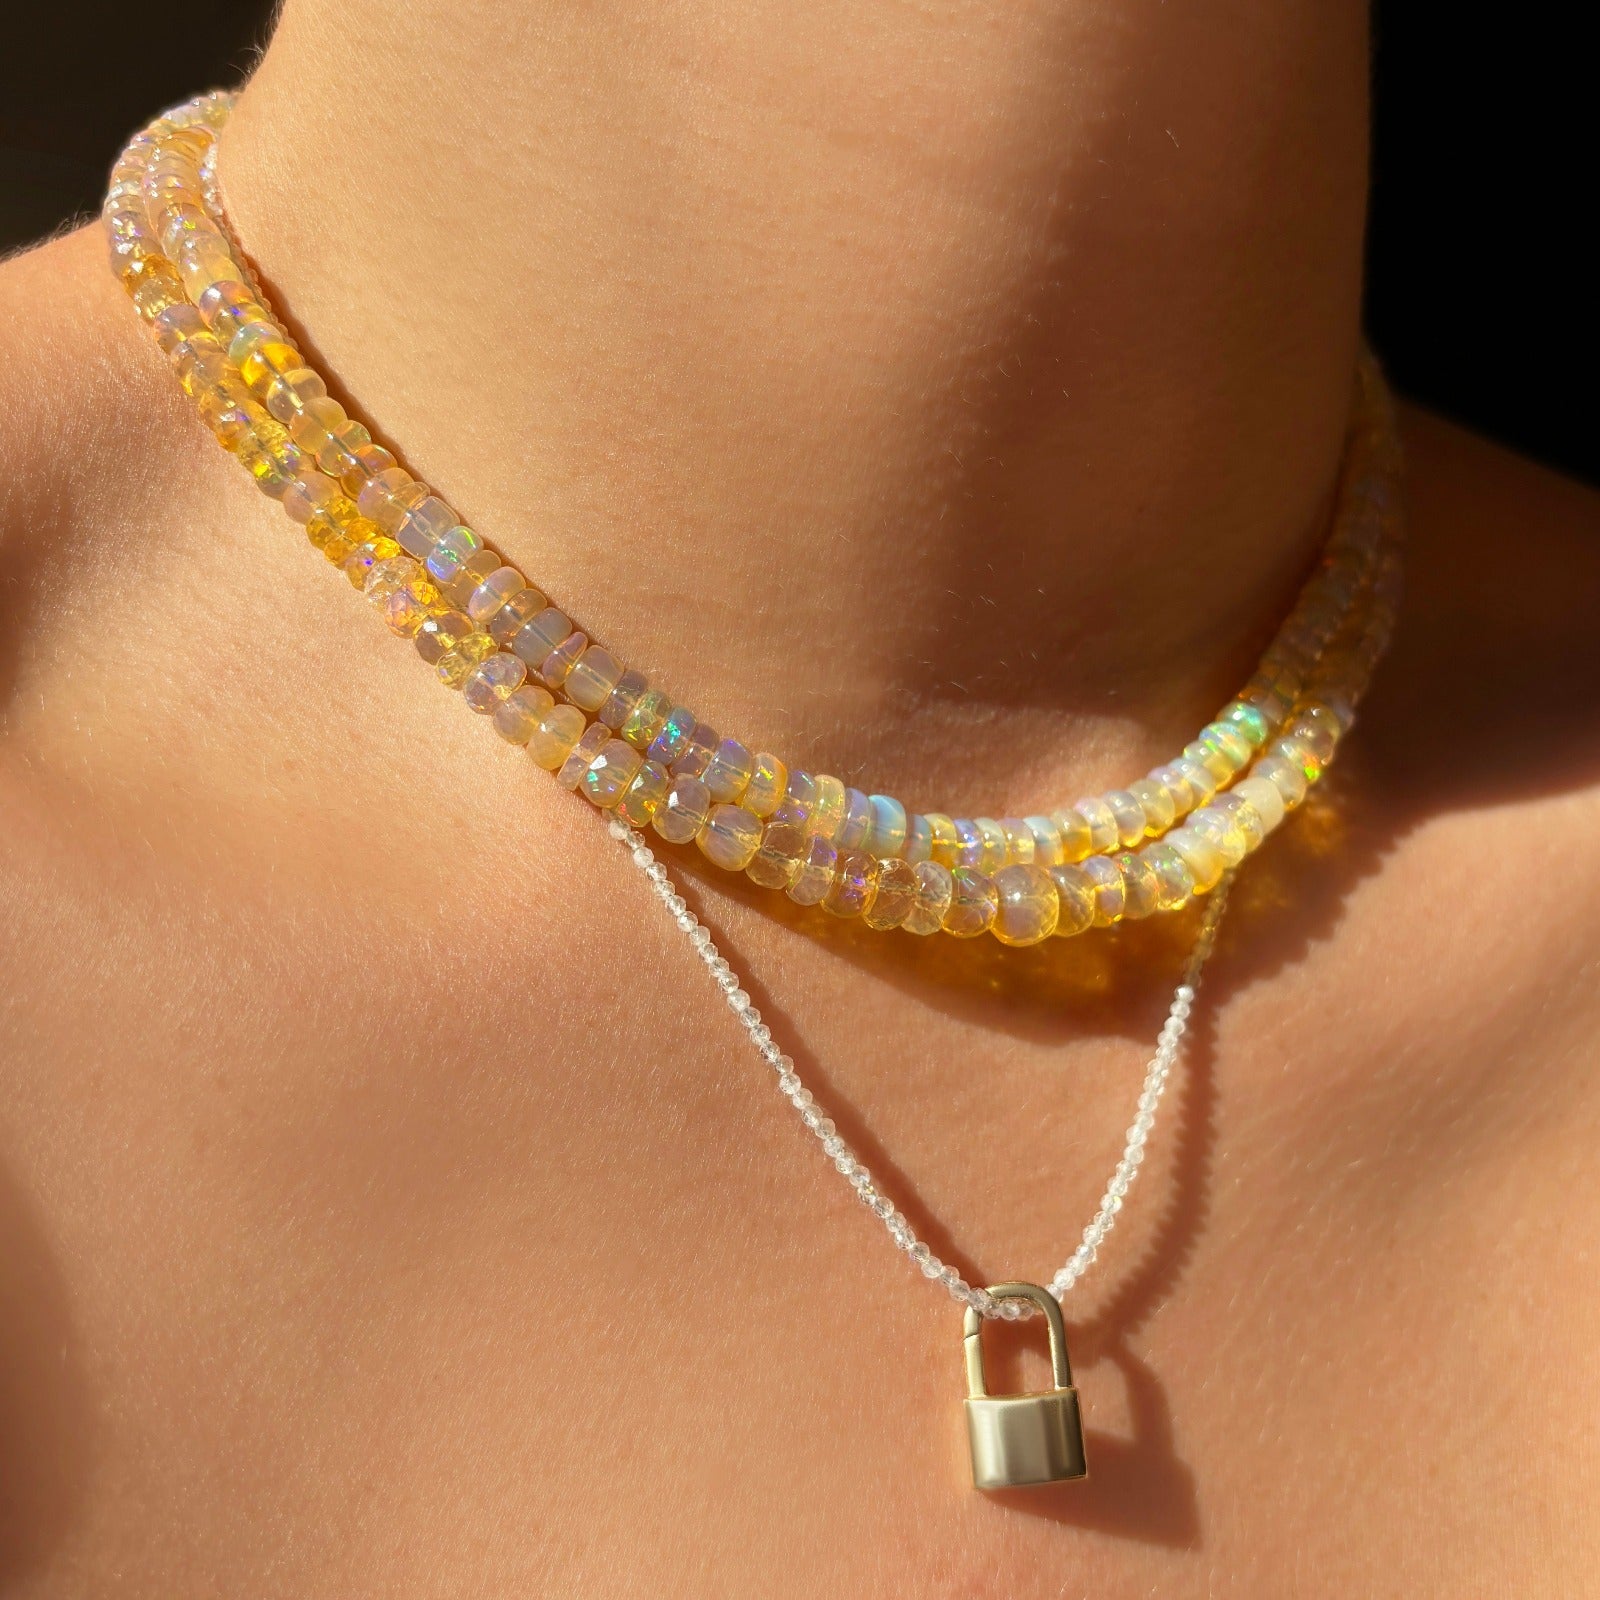 Shimmering beaded necklace made of faceted opals in shades of clear and light yellow on a gold linking ovals clasp. Styled on a neck layered with a padlock charm.